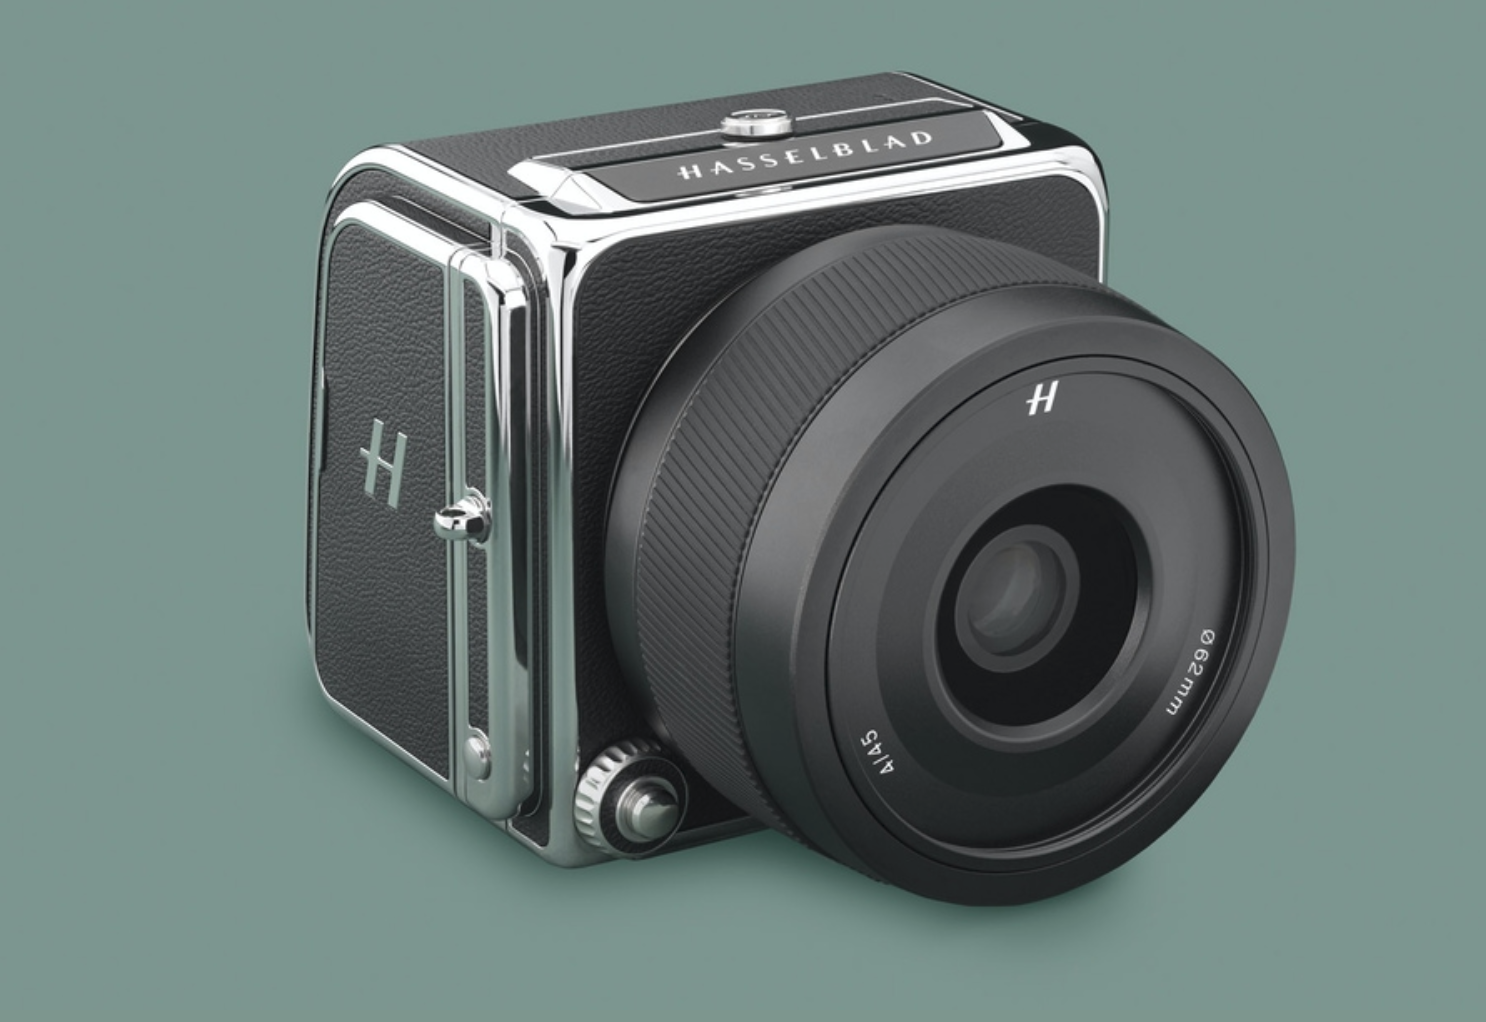 Hasselblad's new $6,400 camera is weird and wonderful | Popular